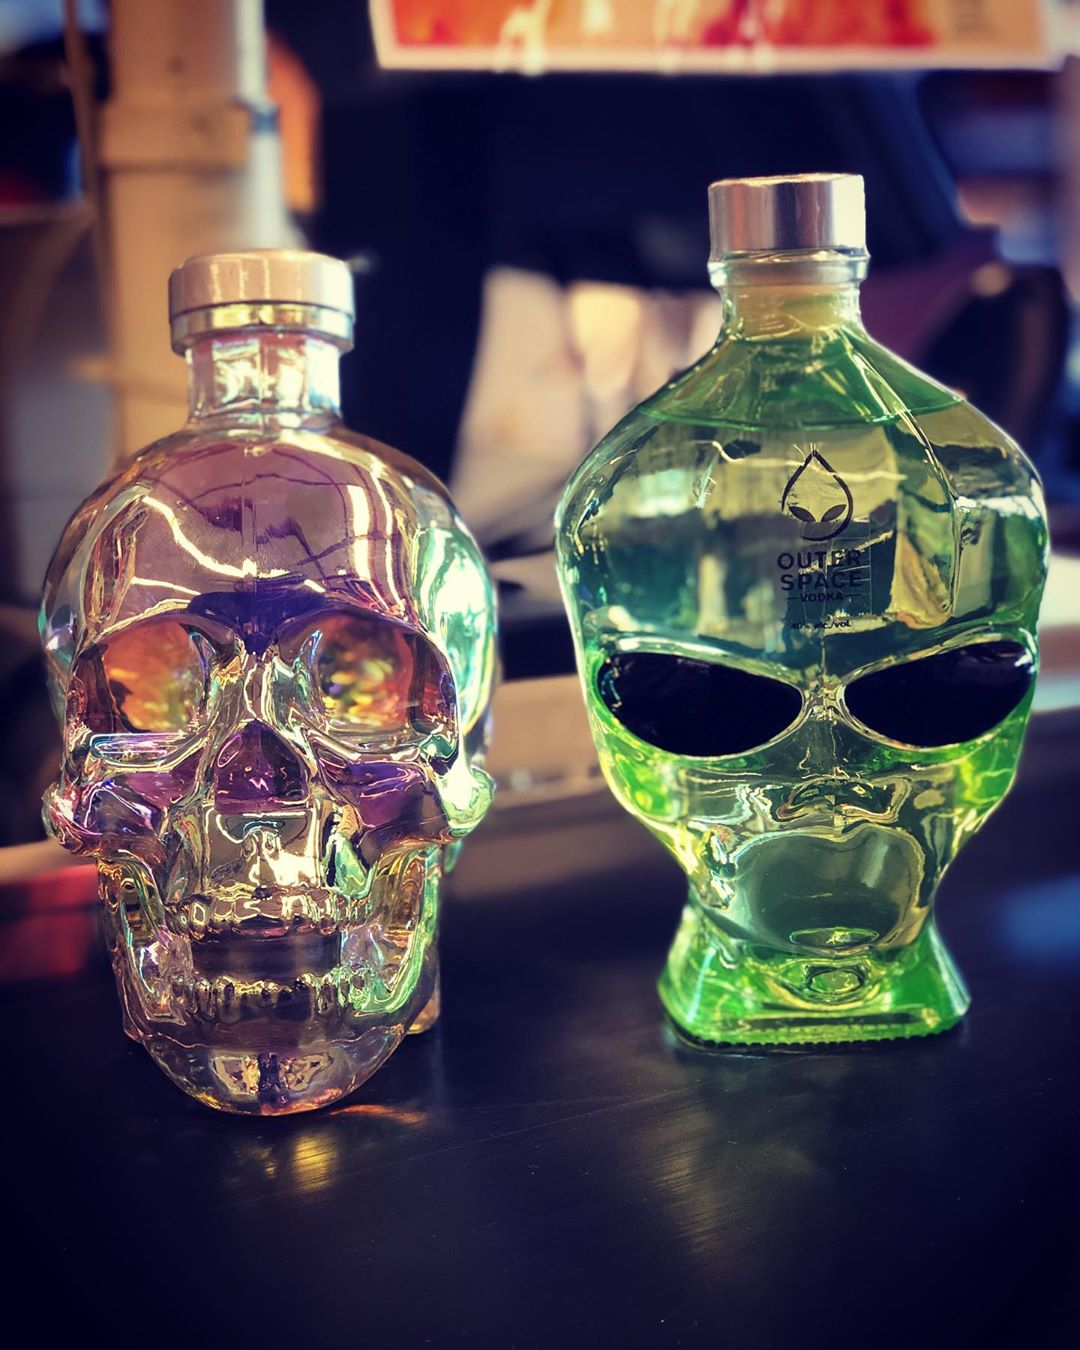 Looking for some Halloween Party vodka? Check these out from @crystalheadvodka and @outerspacevodka … both…